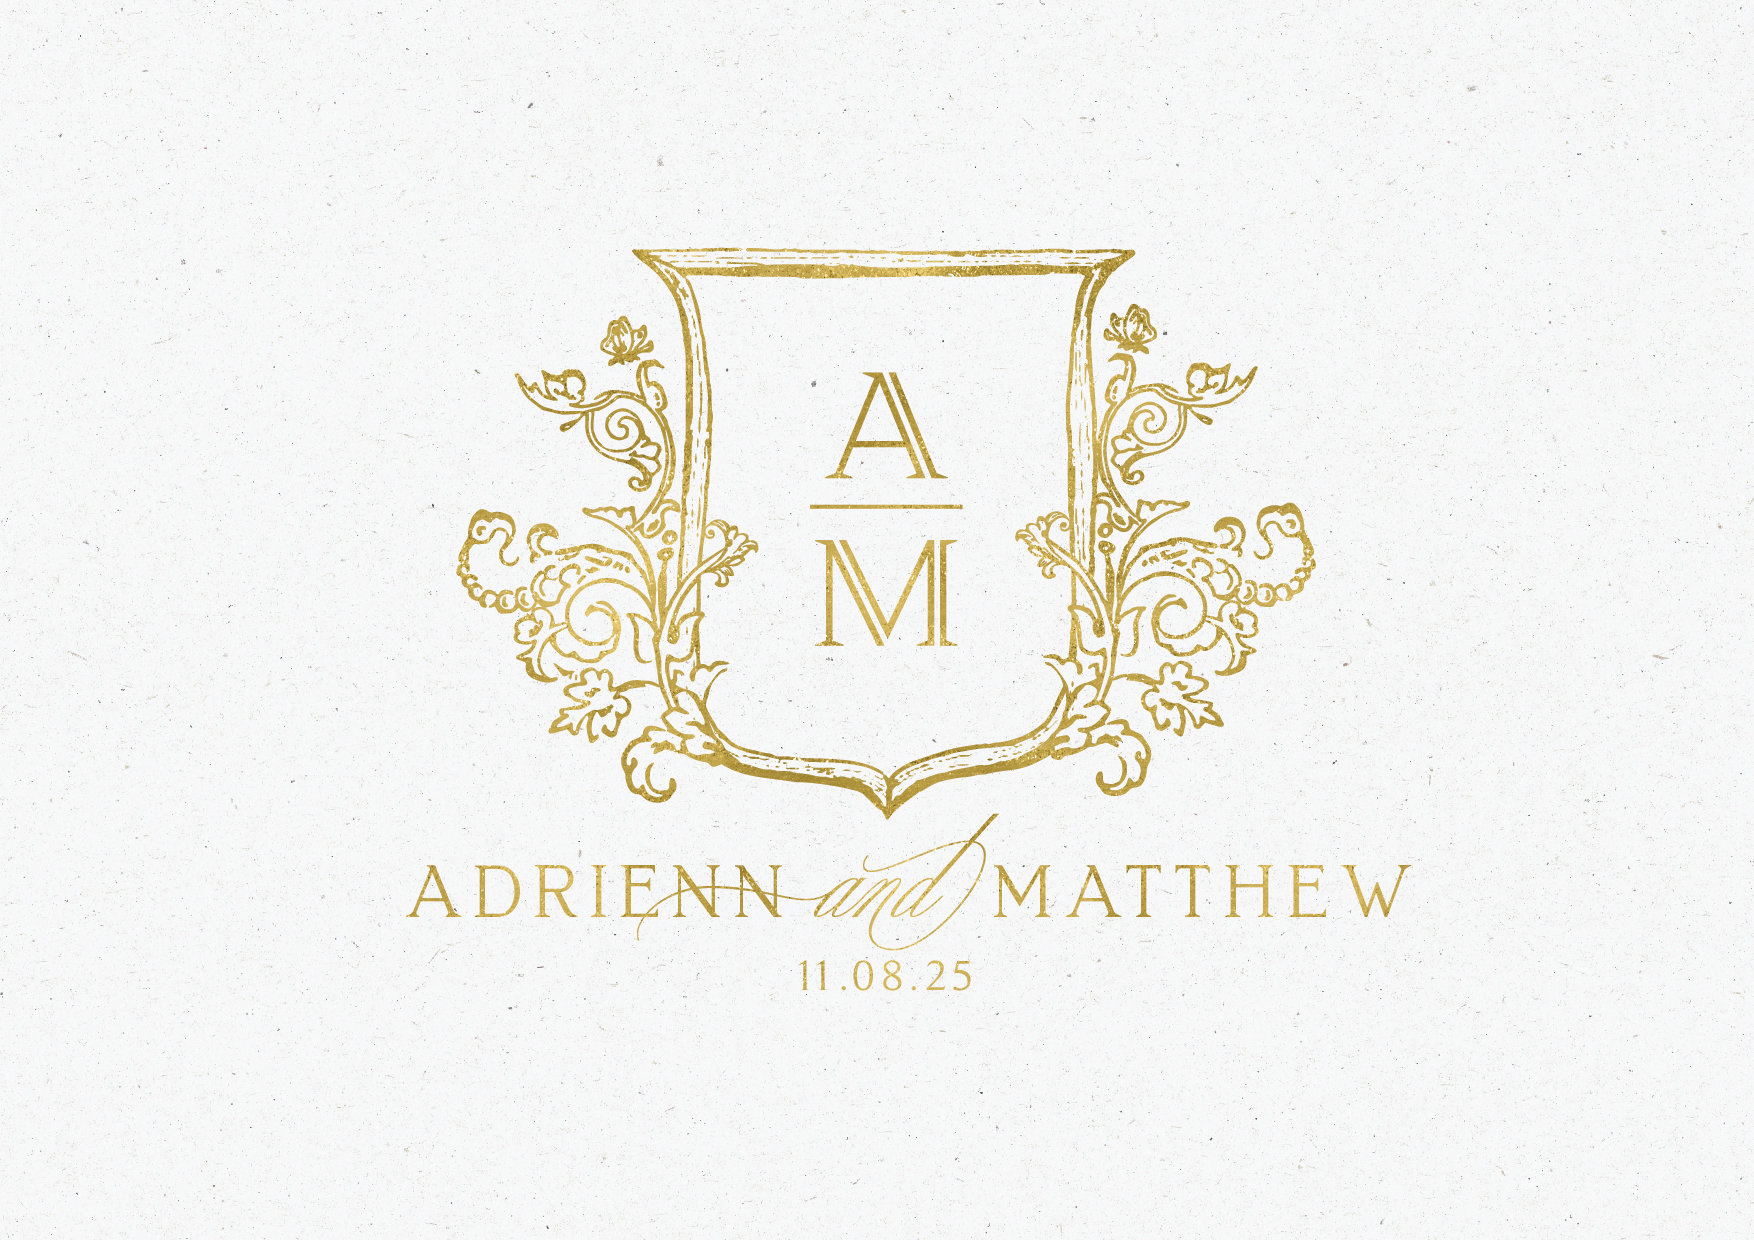 Image Details IST_20768_01881 - Vector Wedding logo Golden Wreath  Background. Floral frame easy to edit. Perfect for invitation or greeting  card with monogram letters or text.. Vector Wedding logo Golden Wreath  Background.